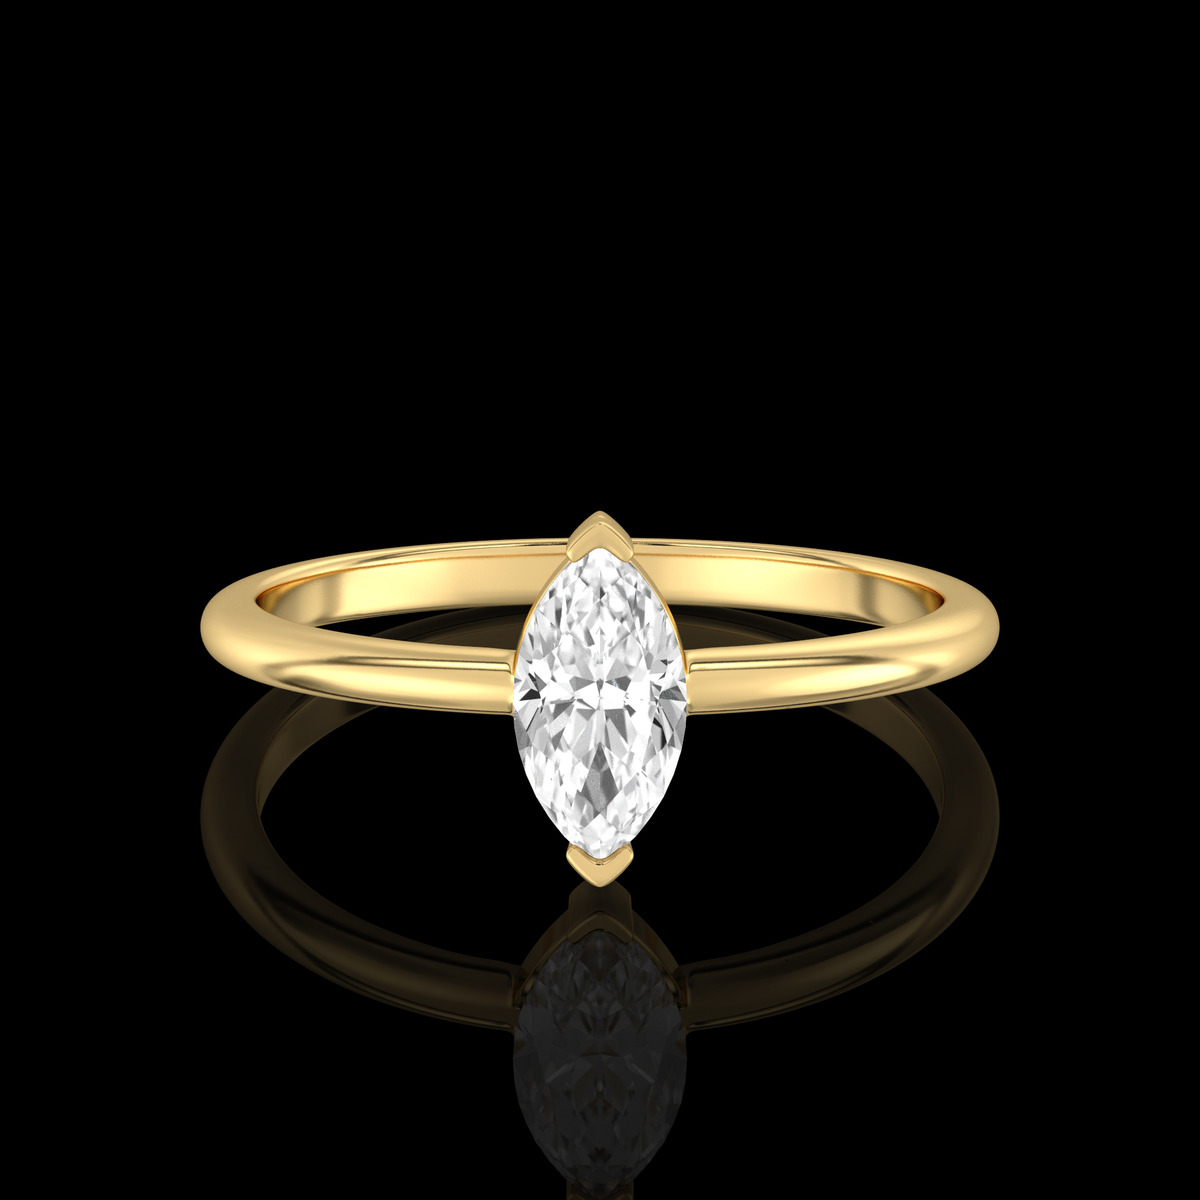 Marquise Solitaire Engagement Ring | Marquise Solitaire Engagement Ring | Marquise Cut Diamond Solitaire Ring | Earthly Jewels